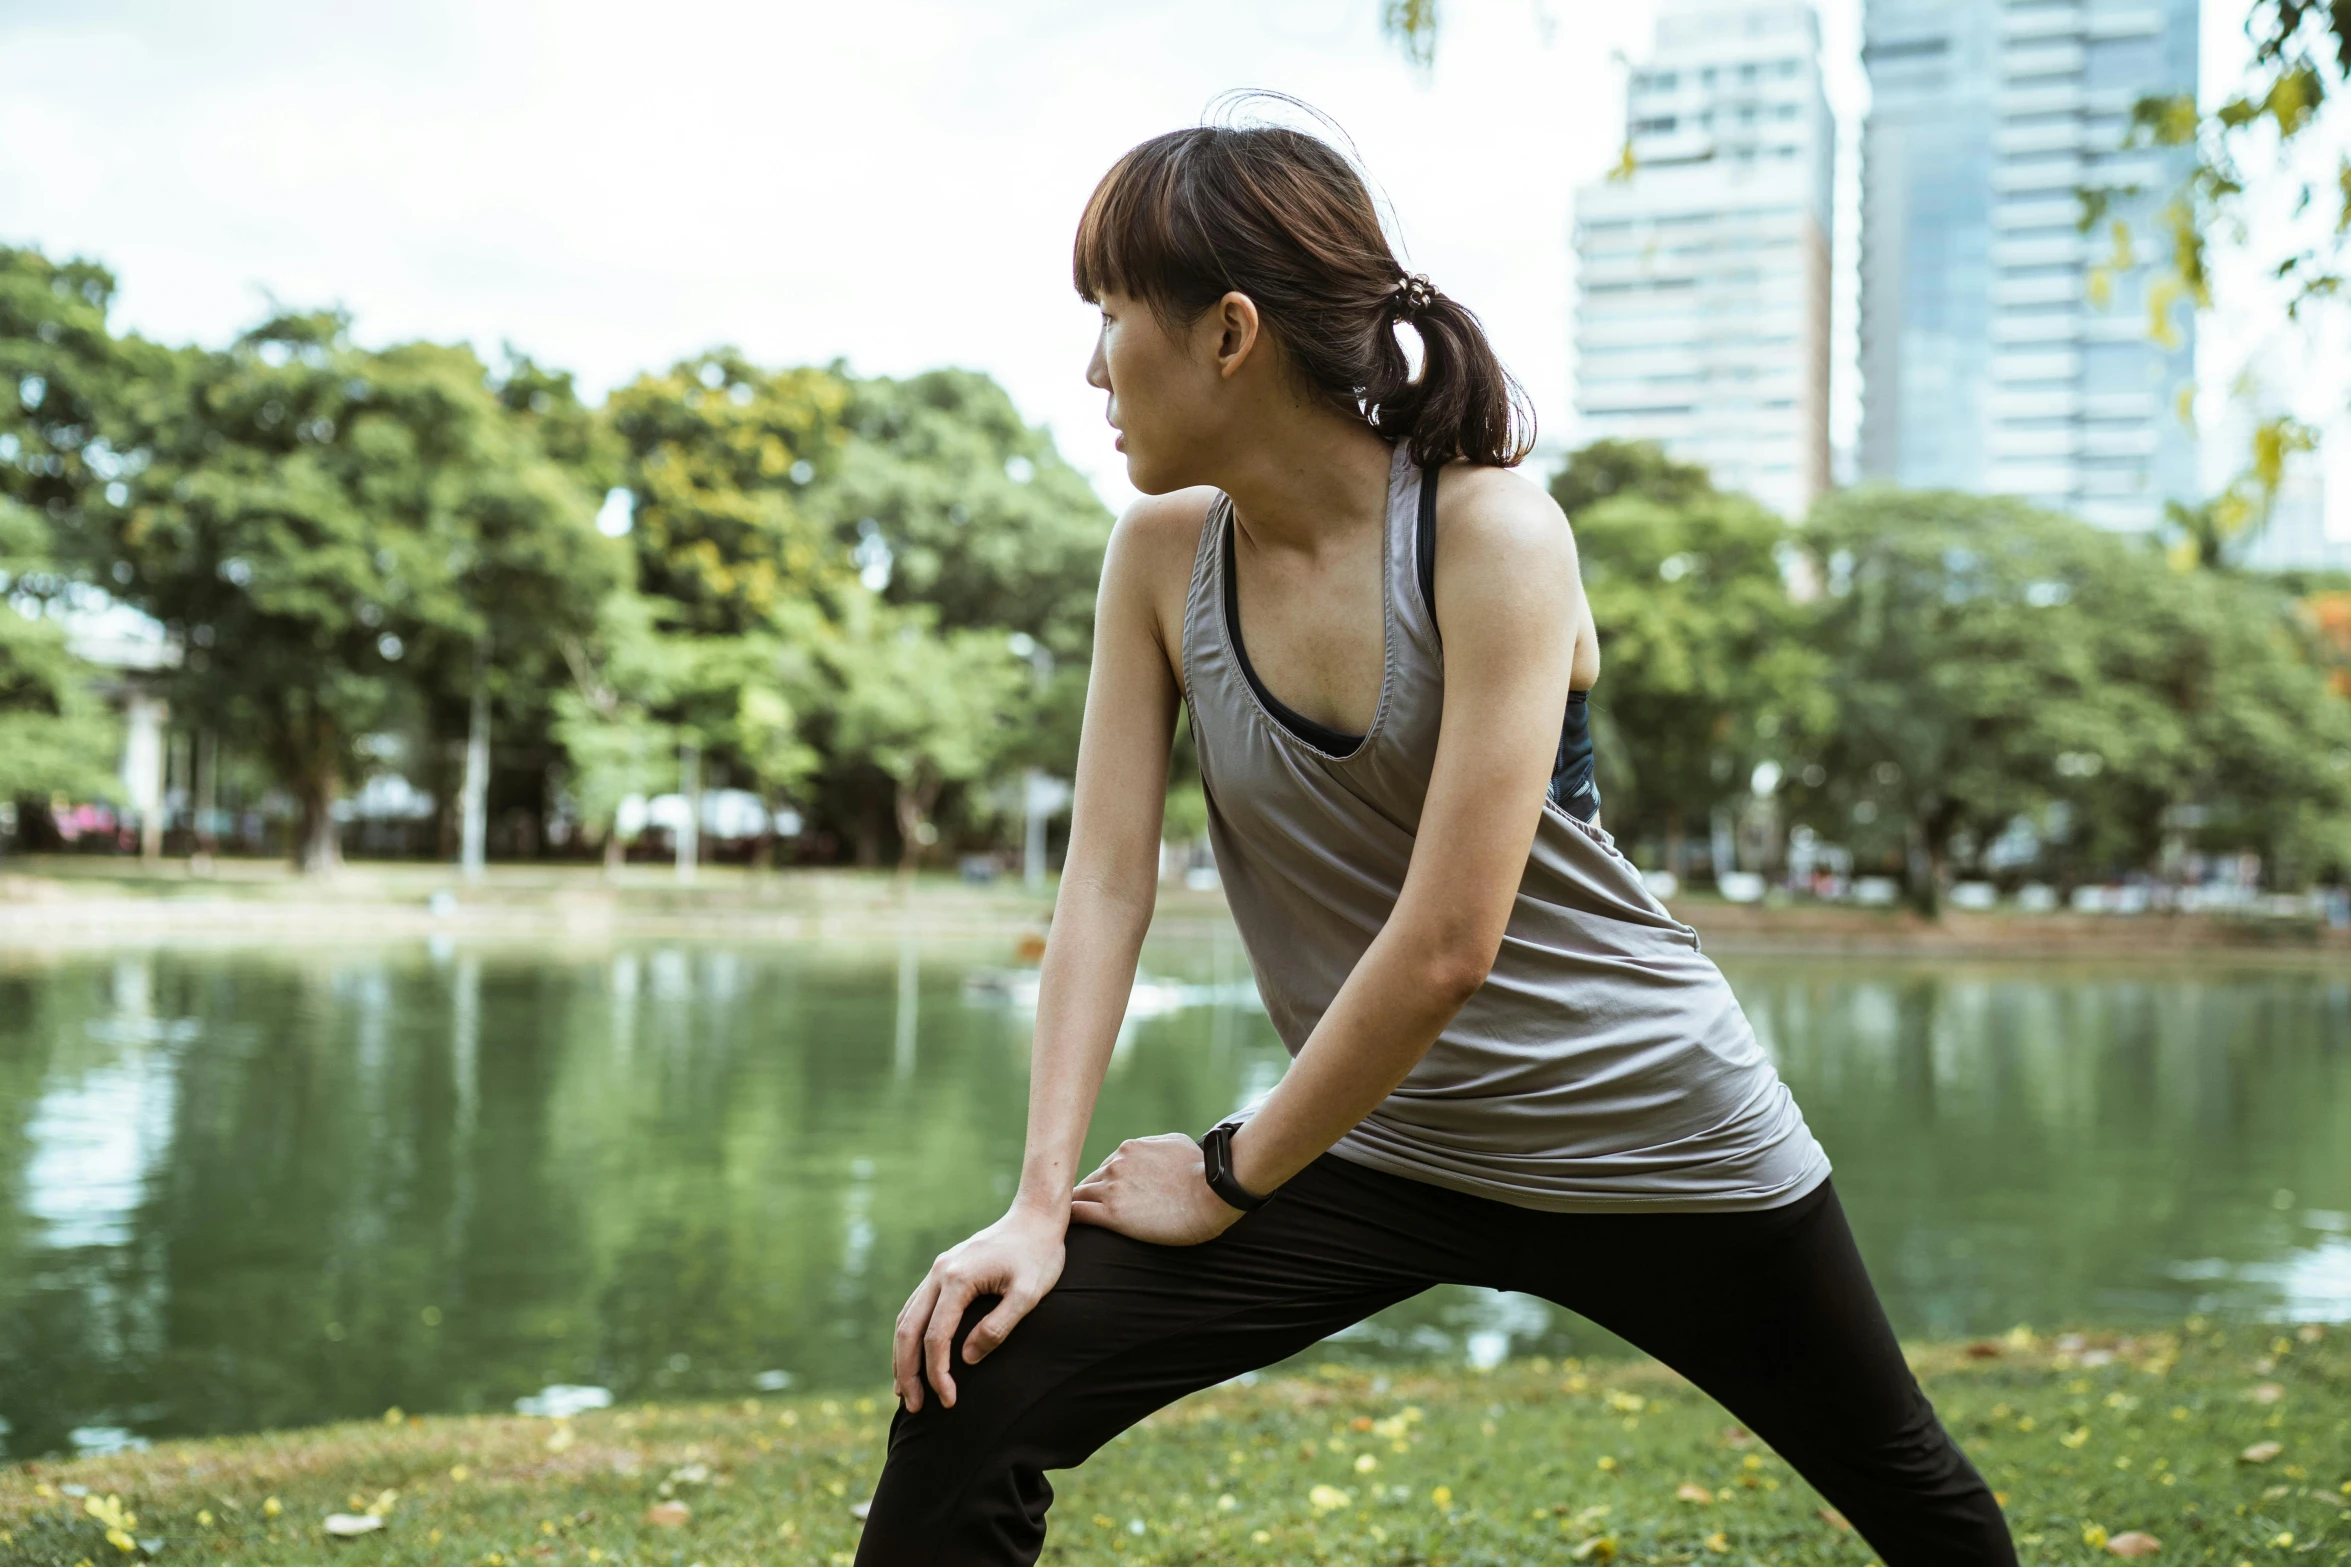 a woman doing a yoga pose in front of a body of water, happening, in a city park, gemma chan, looking to the side, sweat and labour